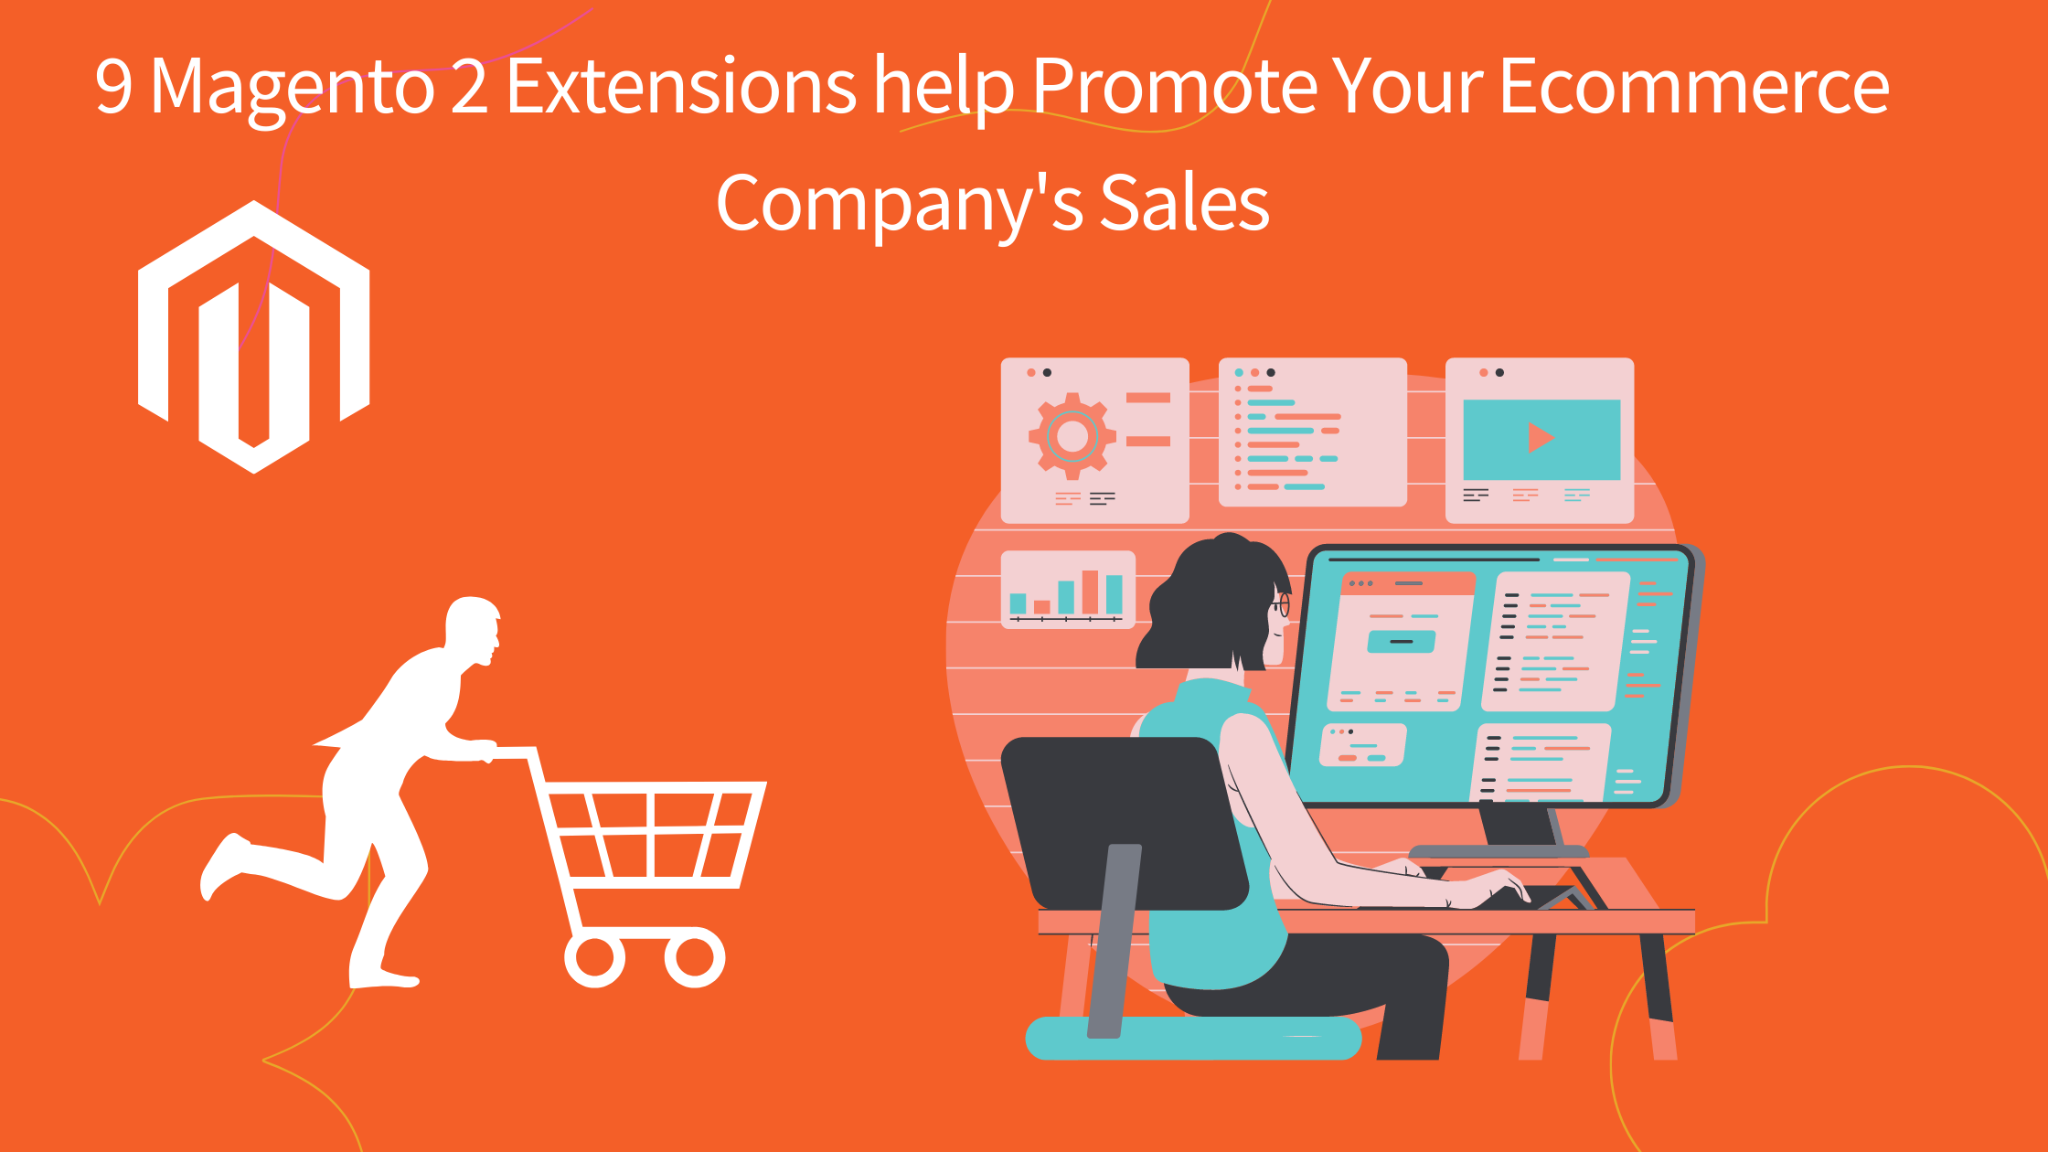 9 Magento 2 Extensions help Promote Your Ecommerce Company’s Sales